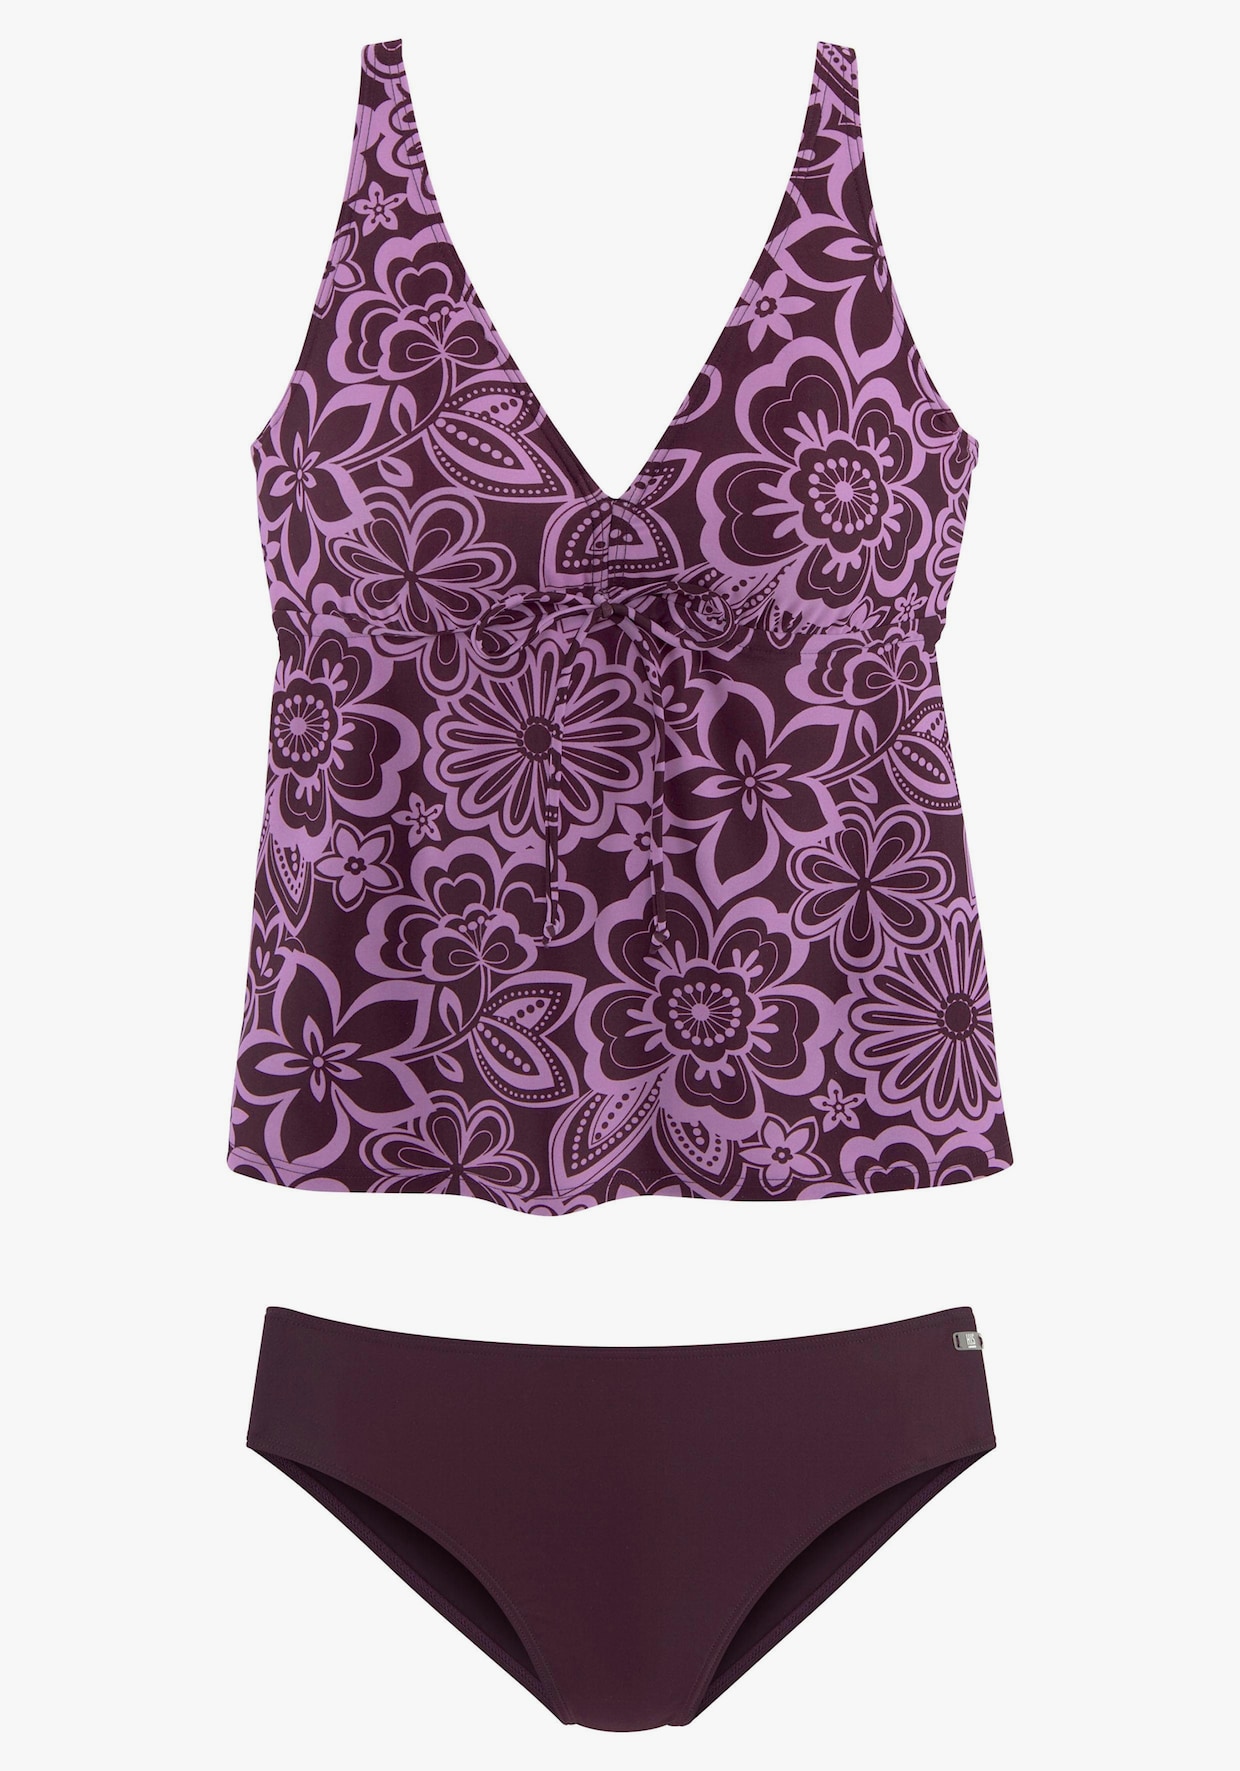 H.I.S Beugeltankini - paars geprint